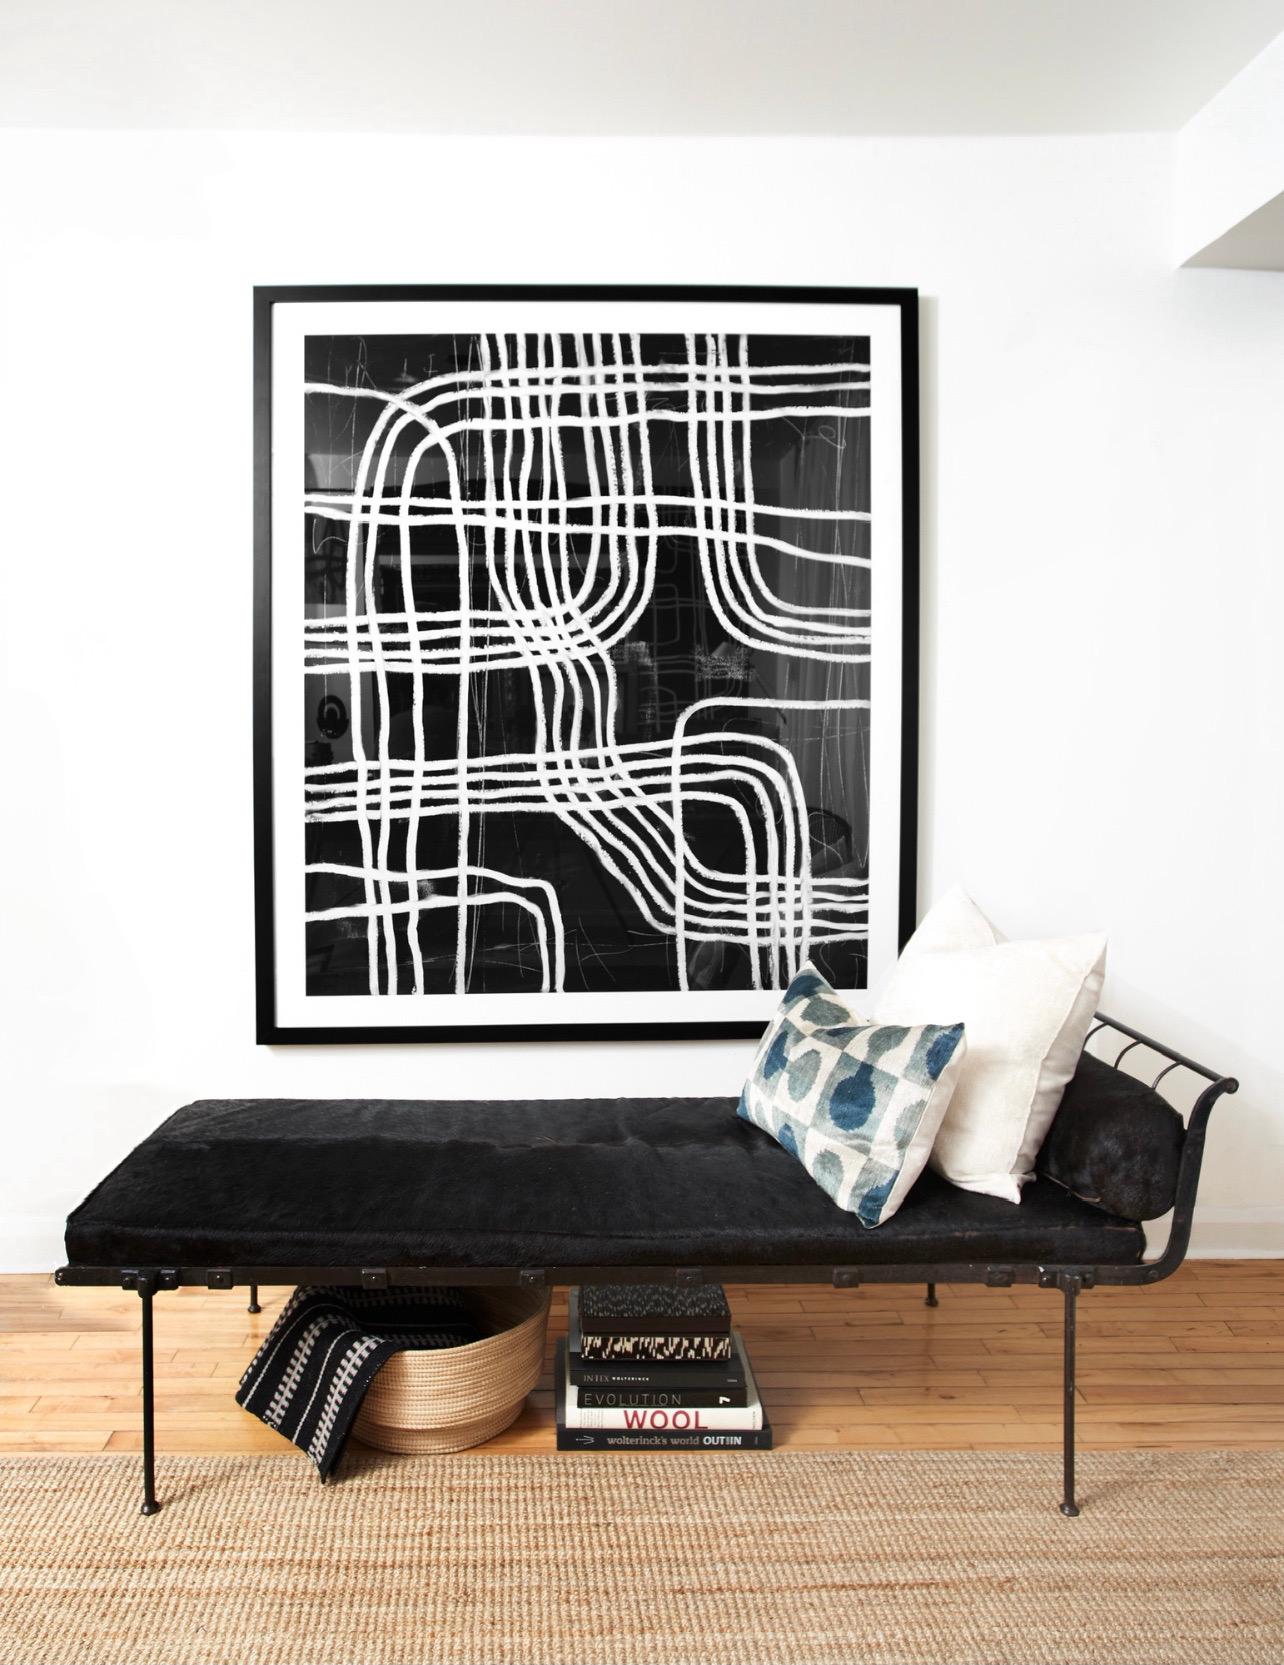 Intersect 7' Original Abstract Print by Murray Duncan

Limited Edition Fine Art Print - Edition of 10 Size: 36